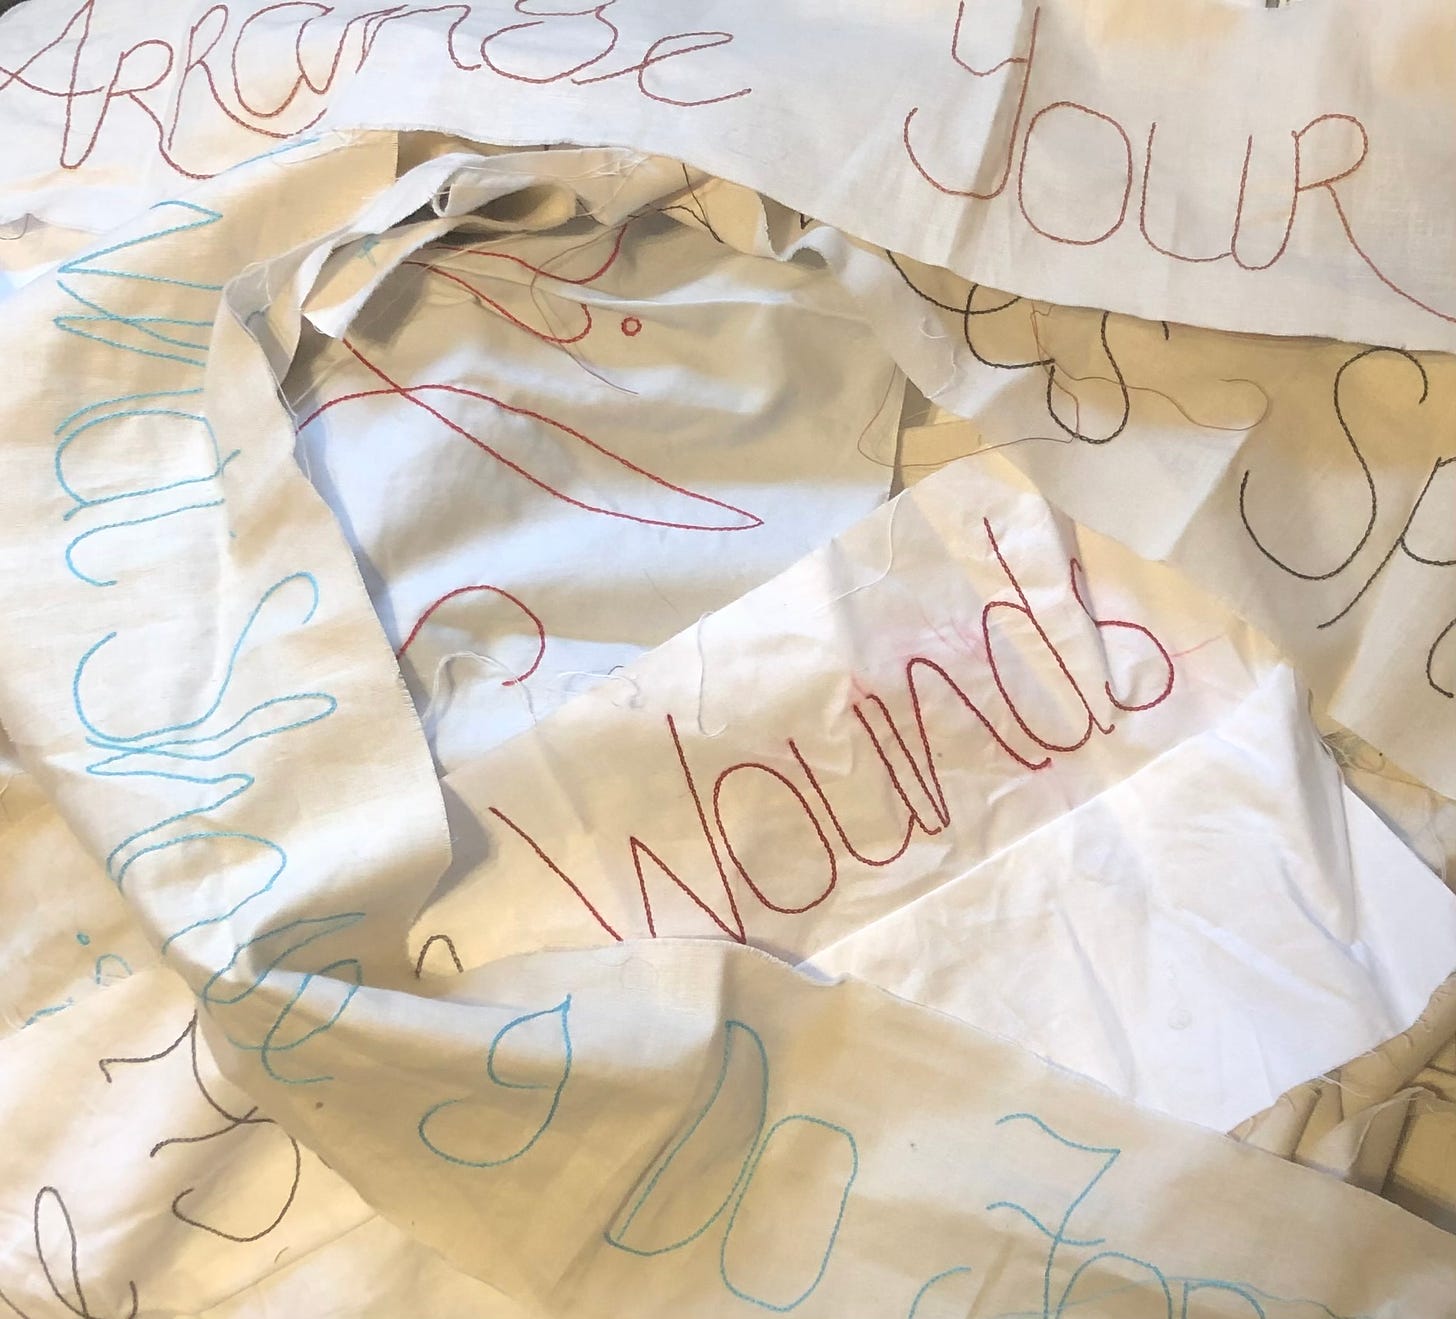 Strips of fabric stitched with various words in different colours